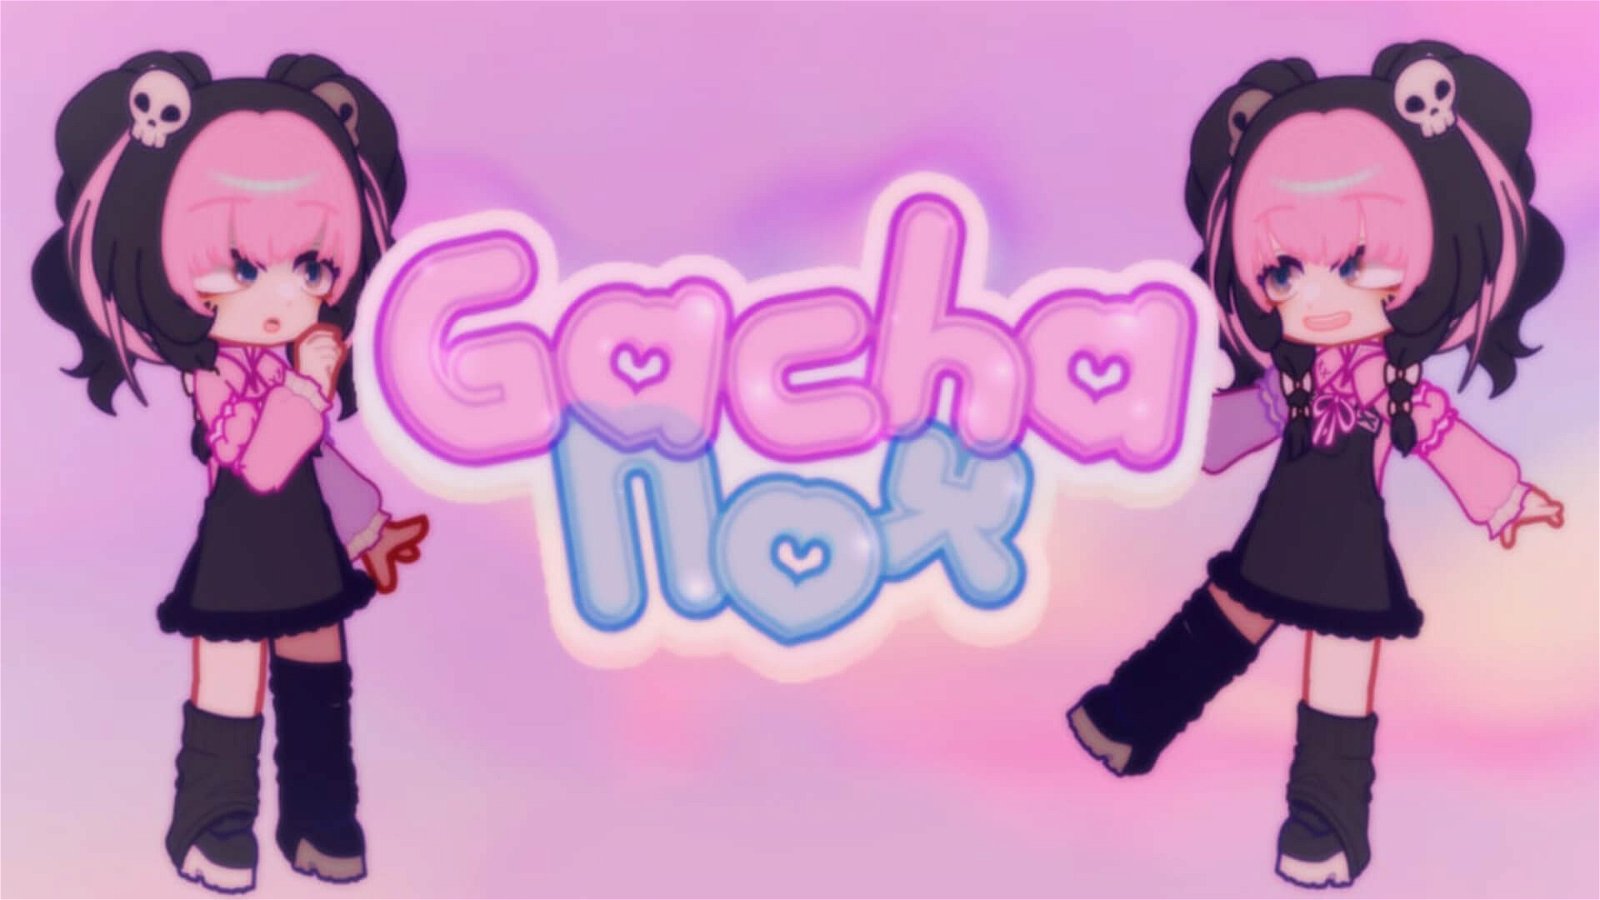 Gacha Pleasure Apk V1.0.0 💥 Download for Android & iOS